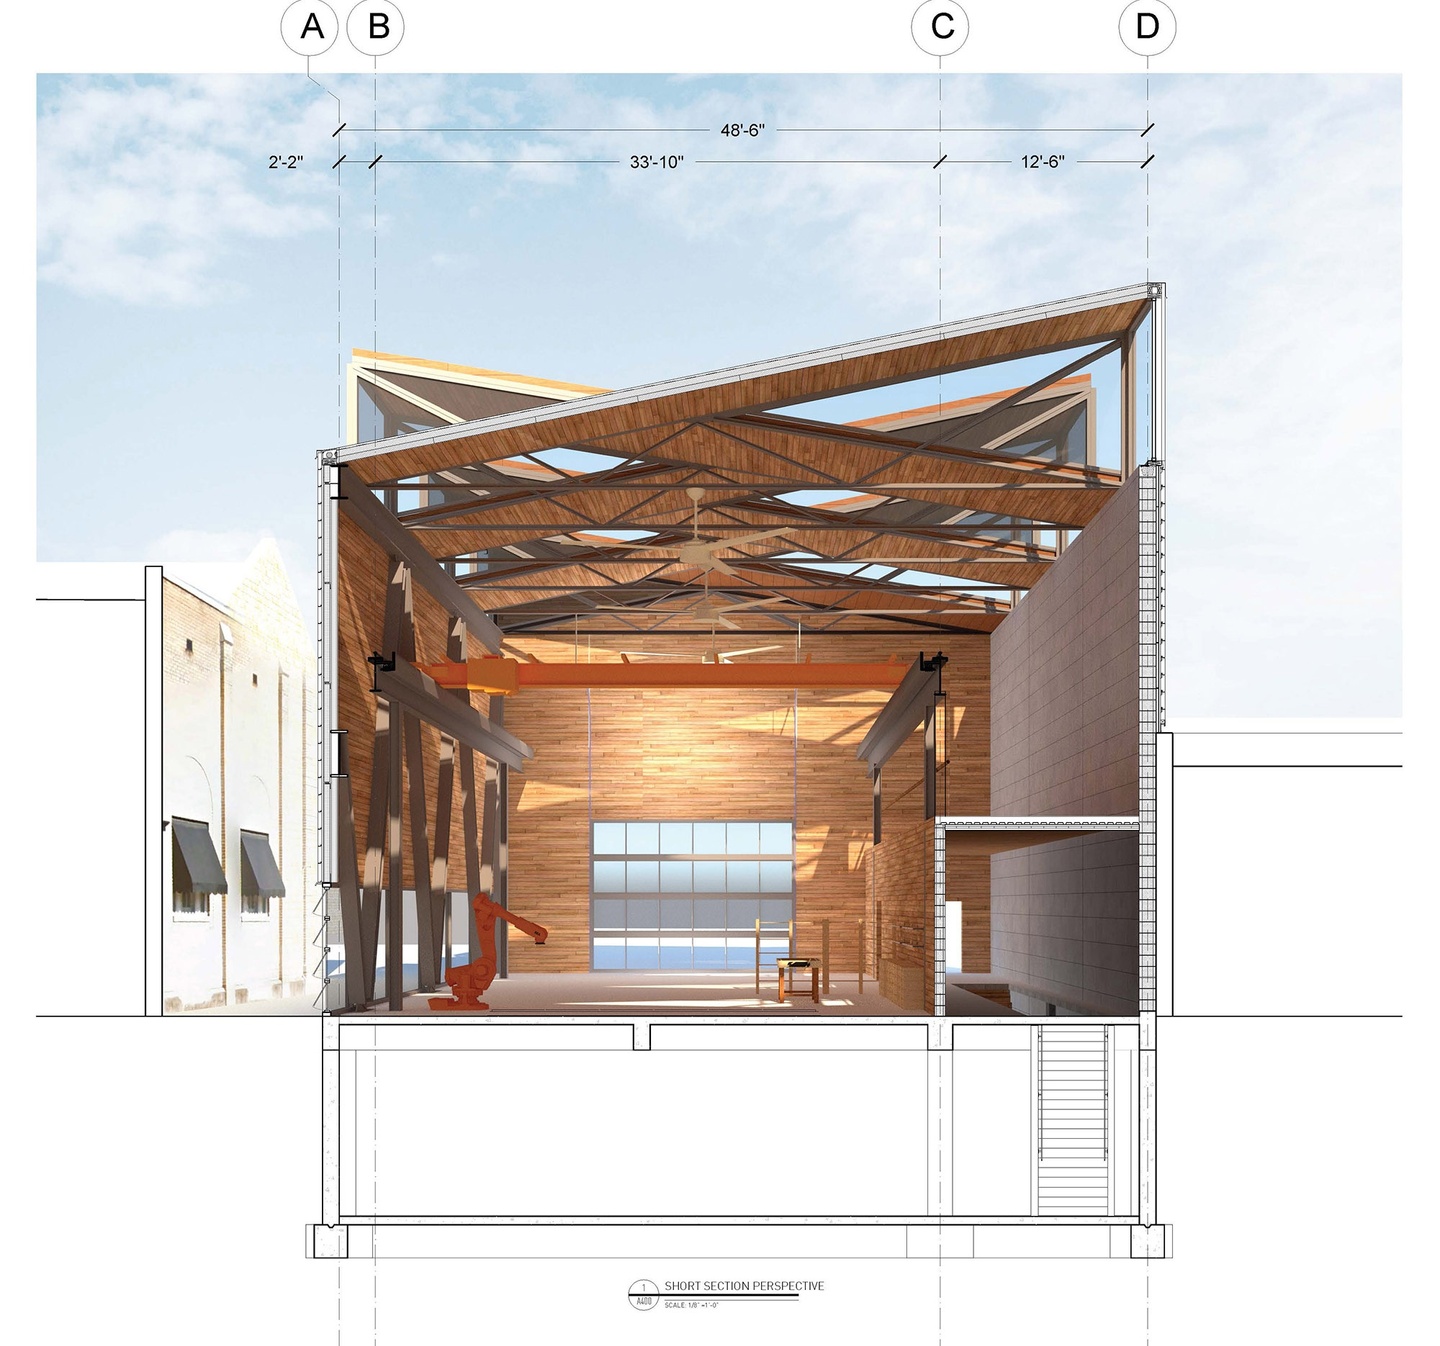 Cross section of a big open space building with criss-cross roof and wooden walls. 